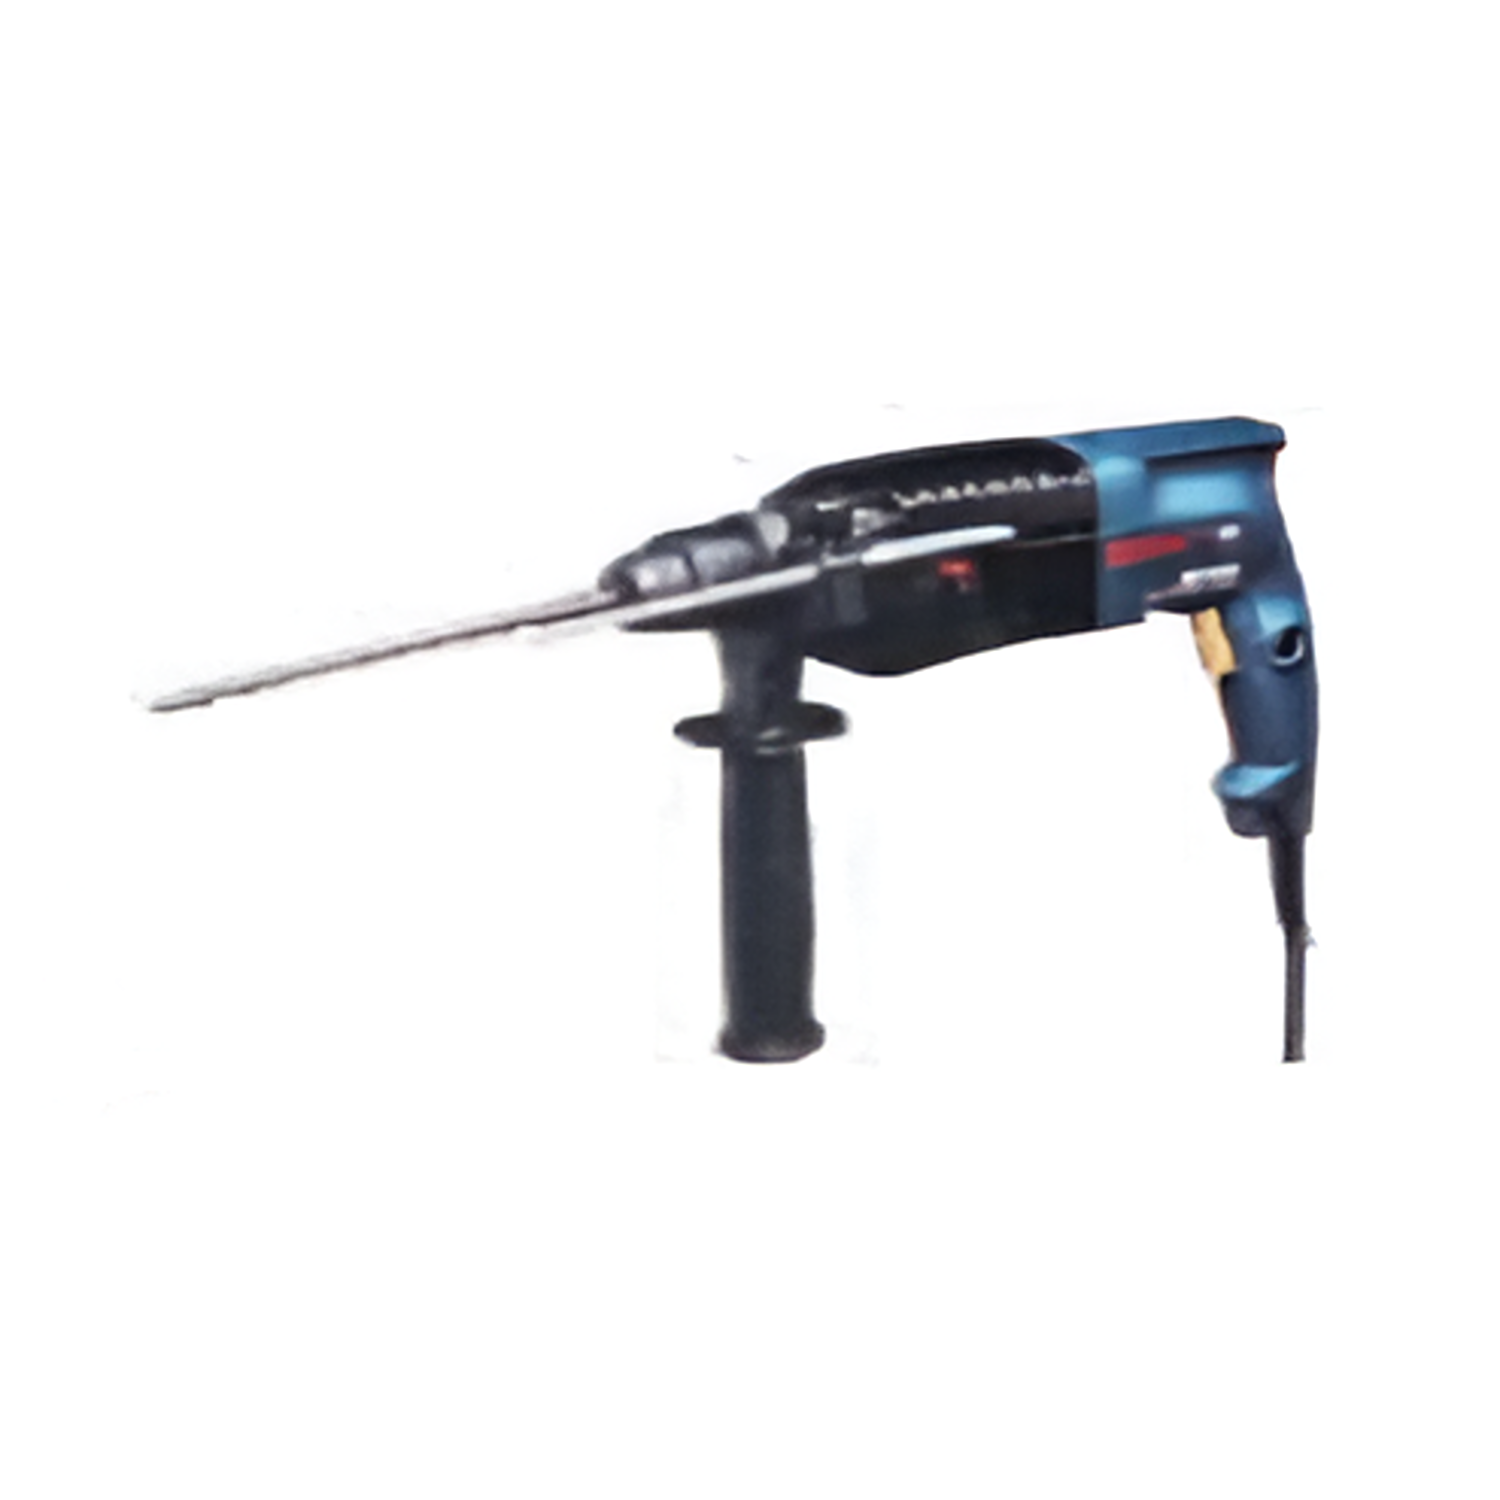 YEW AIK AC00356 Rotary Hammer Power Tools GBH 2-26 RE - Premium Power Tools from YEW AIK - Shop now at Yew Aik.